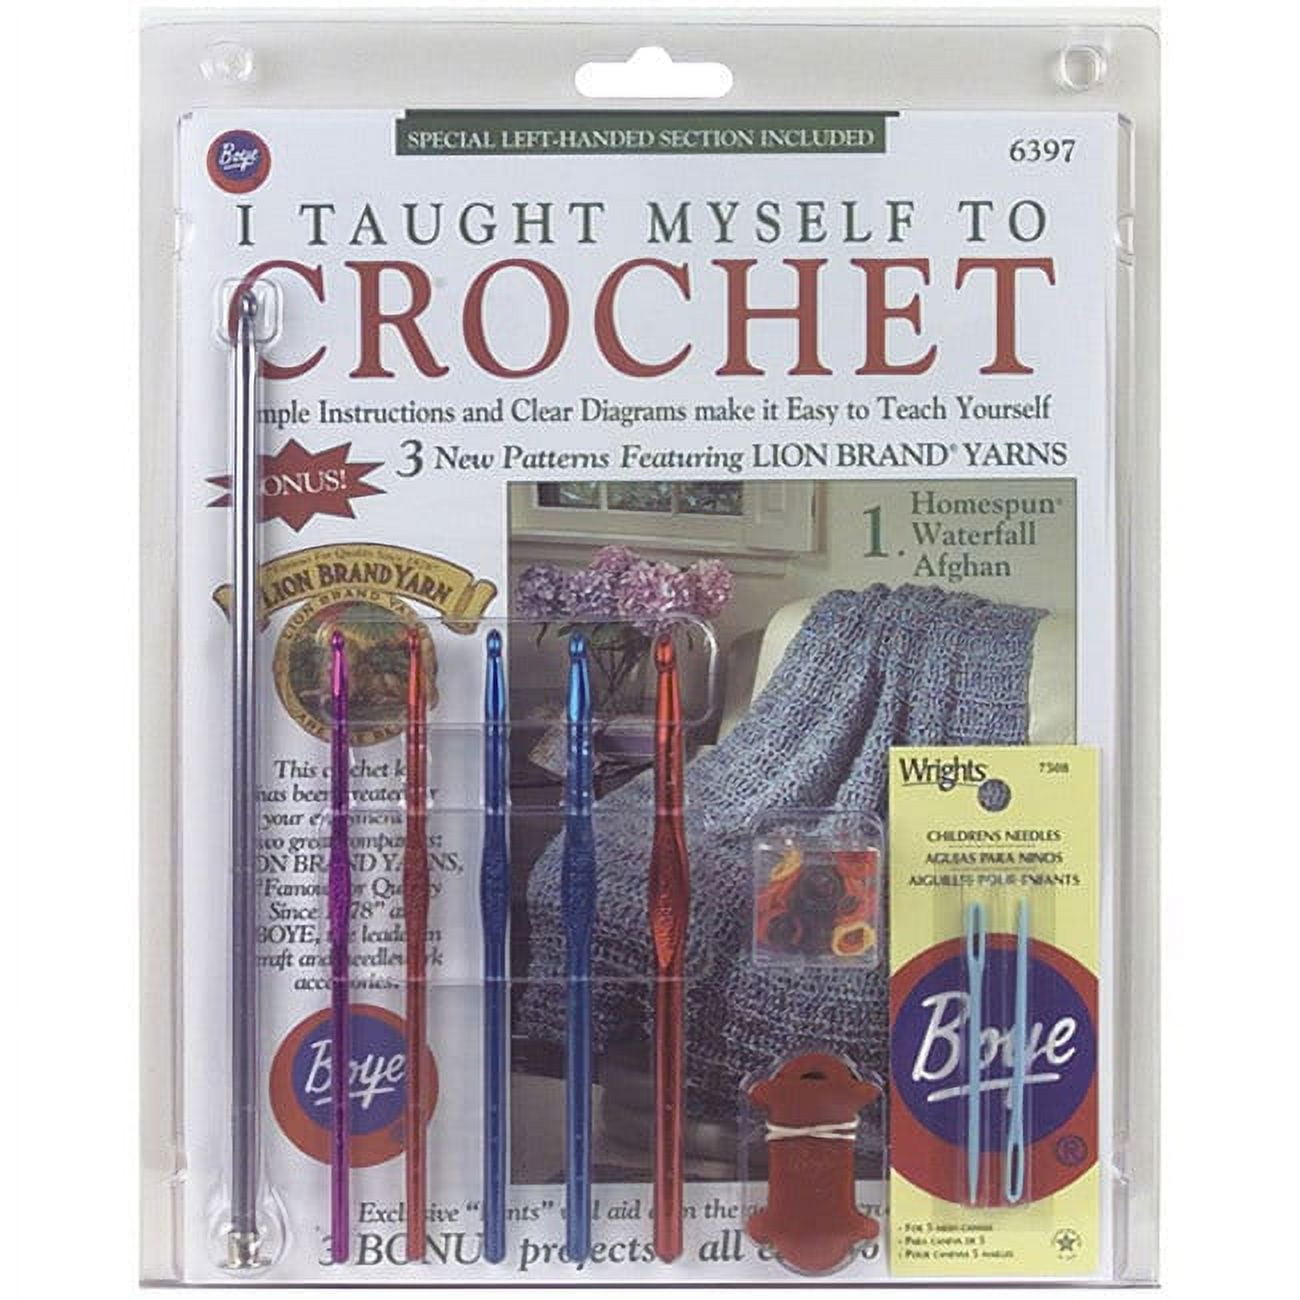 Learn to Crochet Kit – Stitches